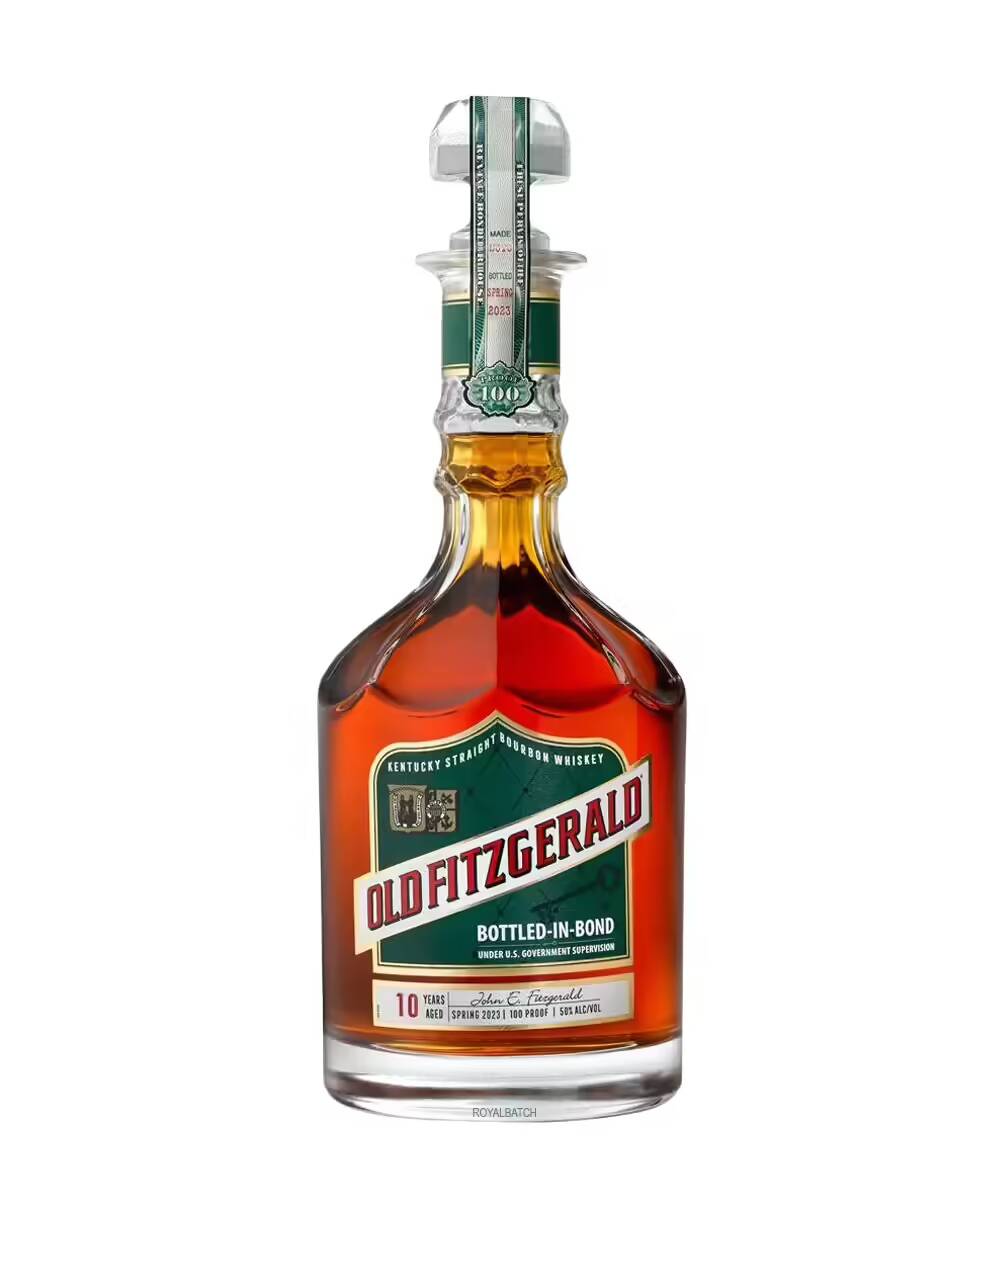 Old Fitzgerald Bottled In Bond 10 year Old Bourbon Whiskey